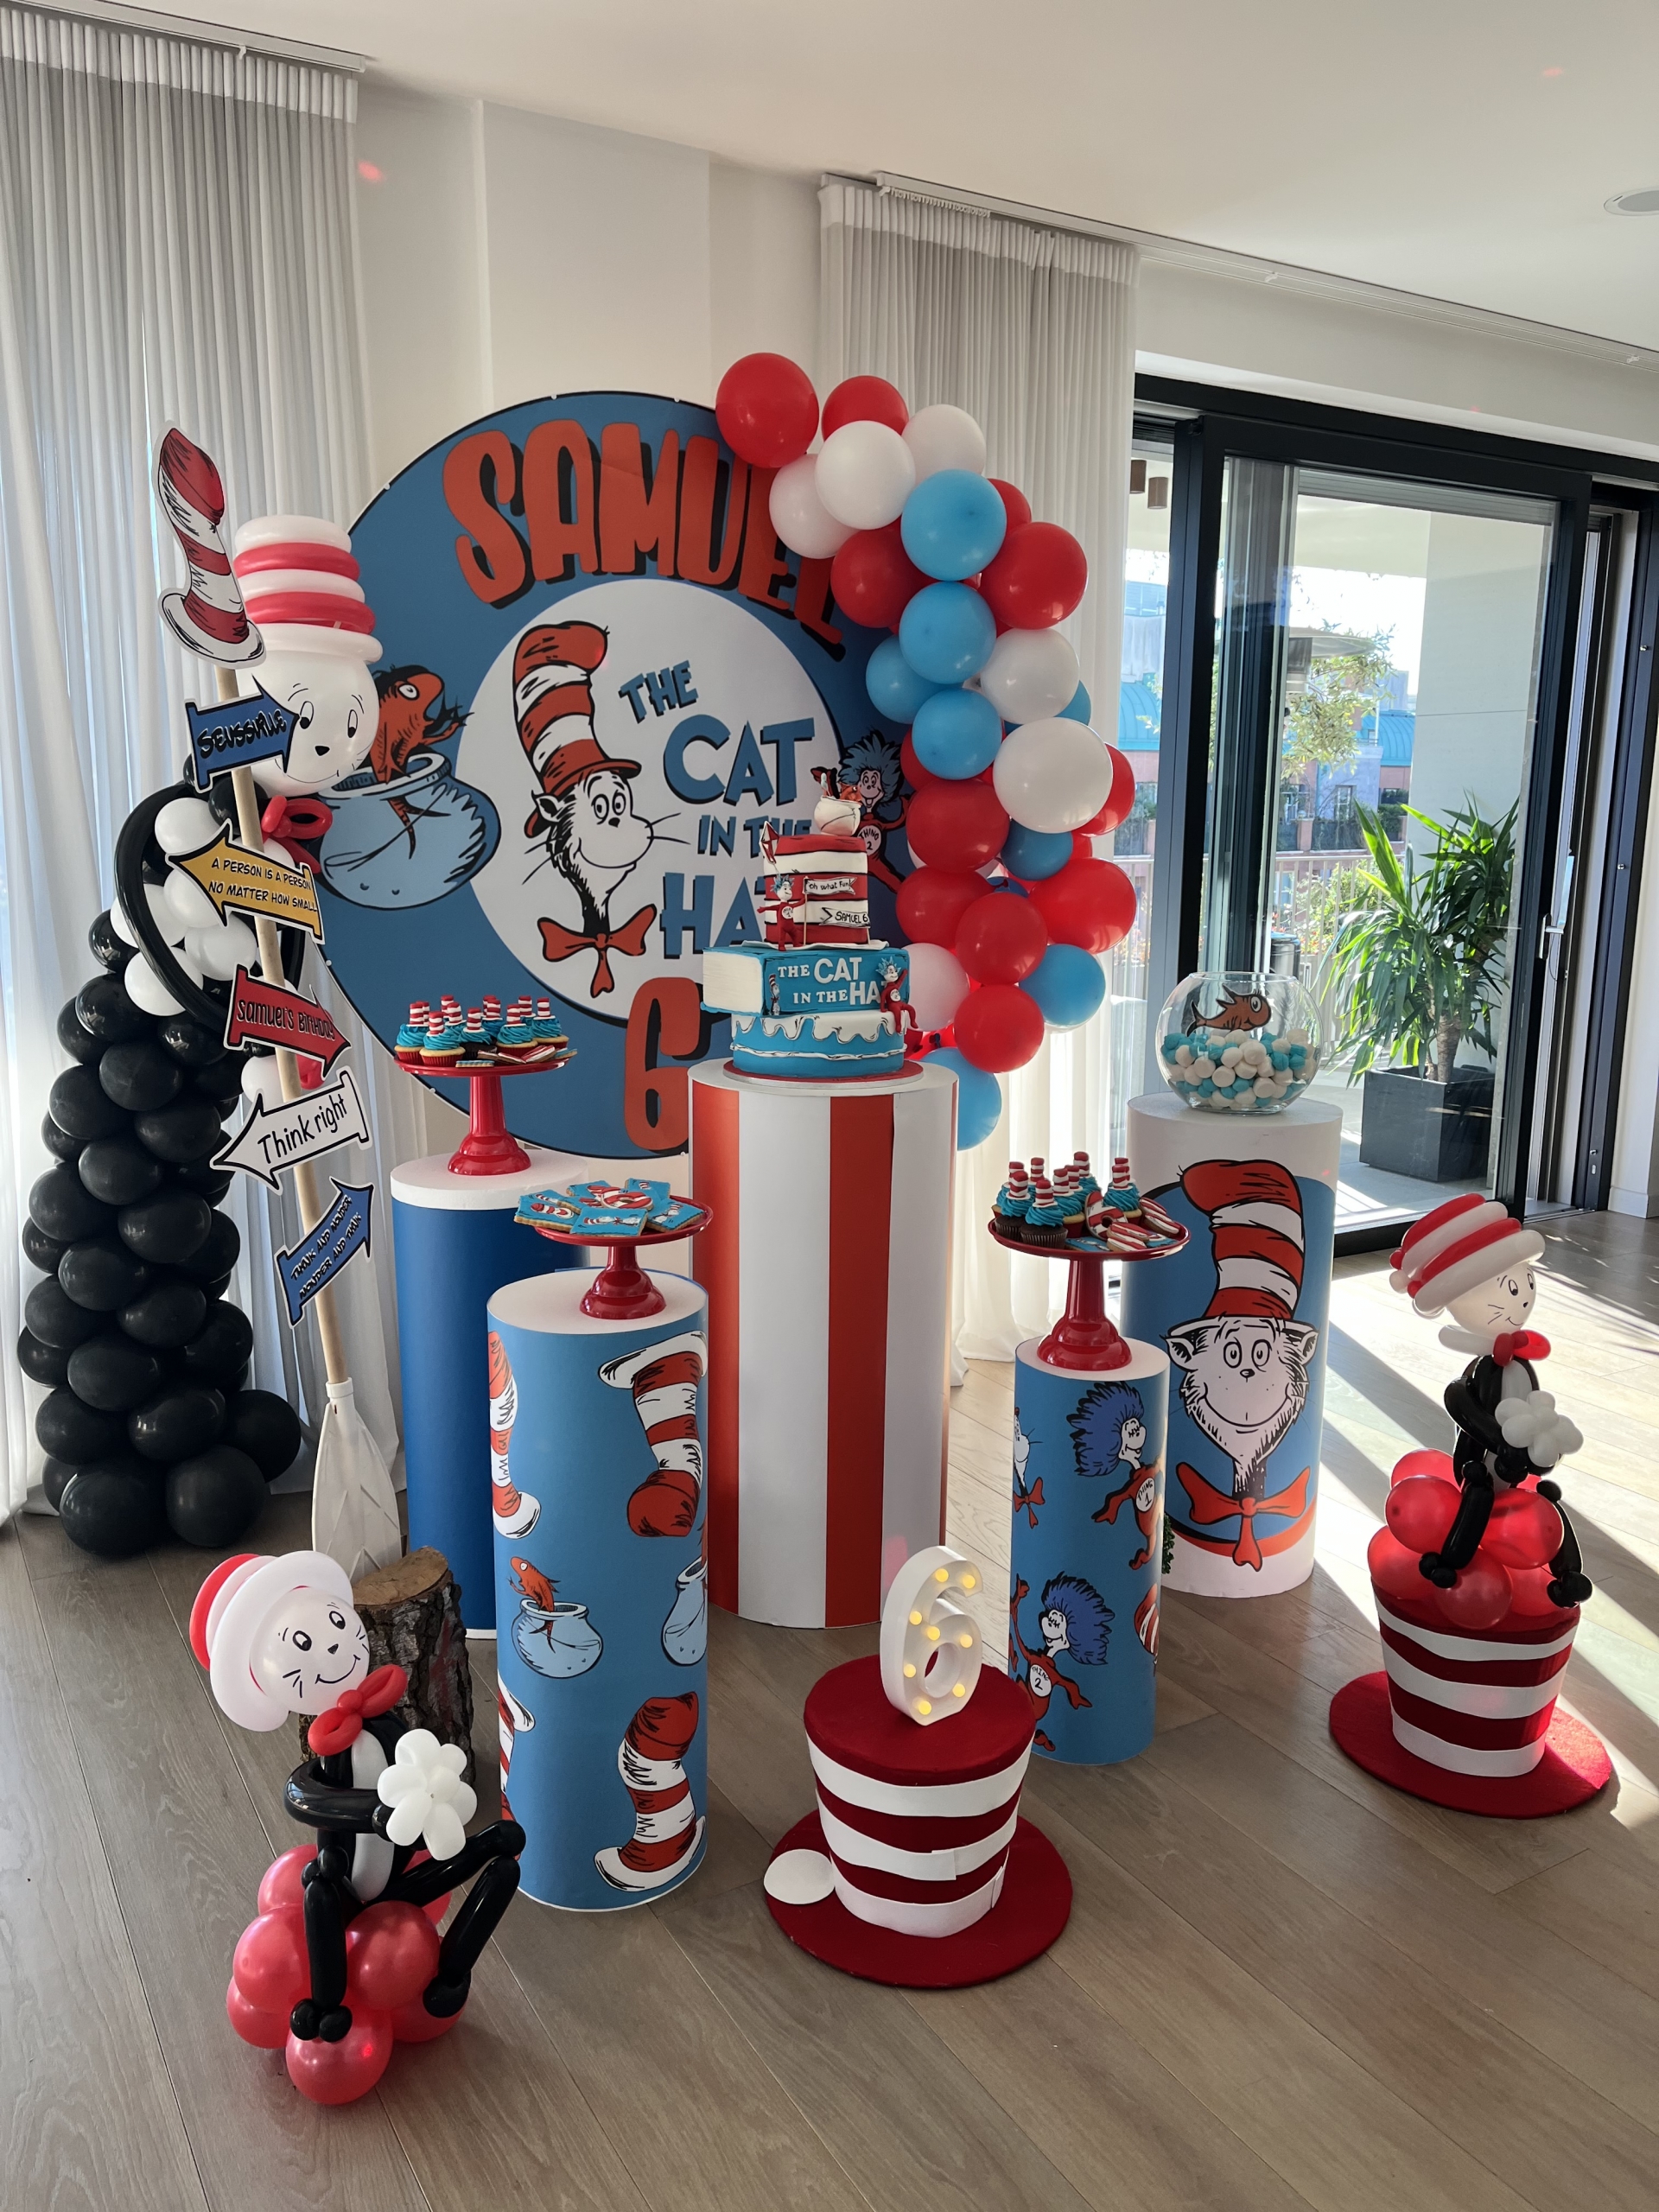 The Cat in the Hat party